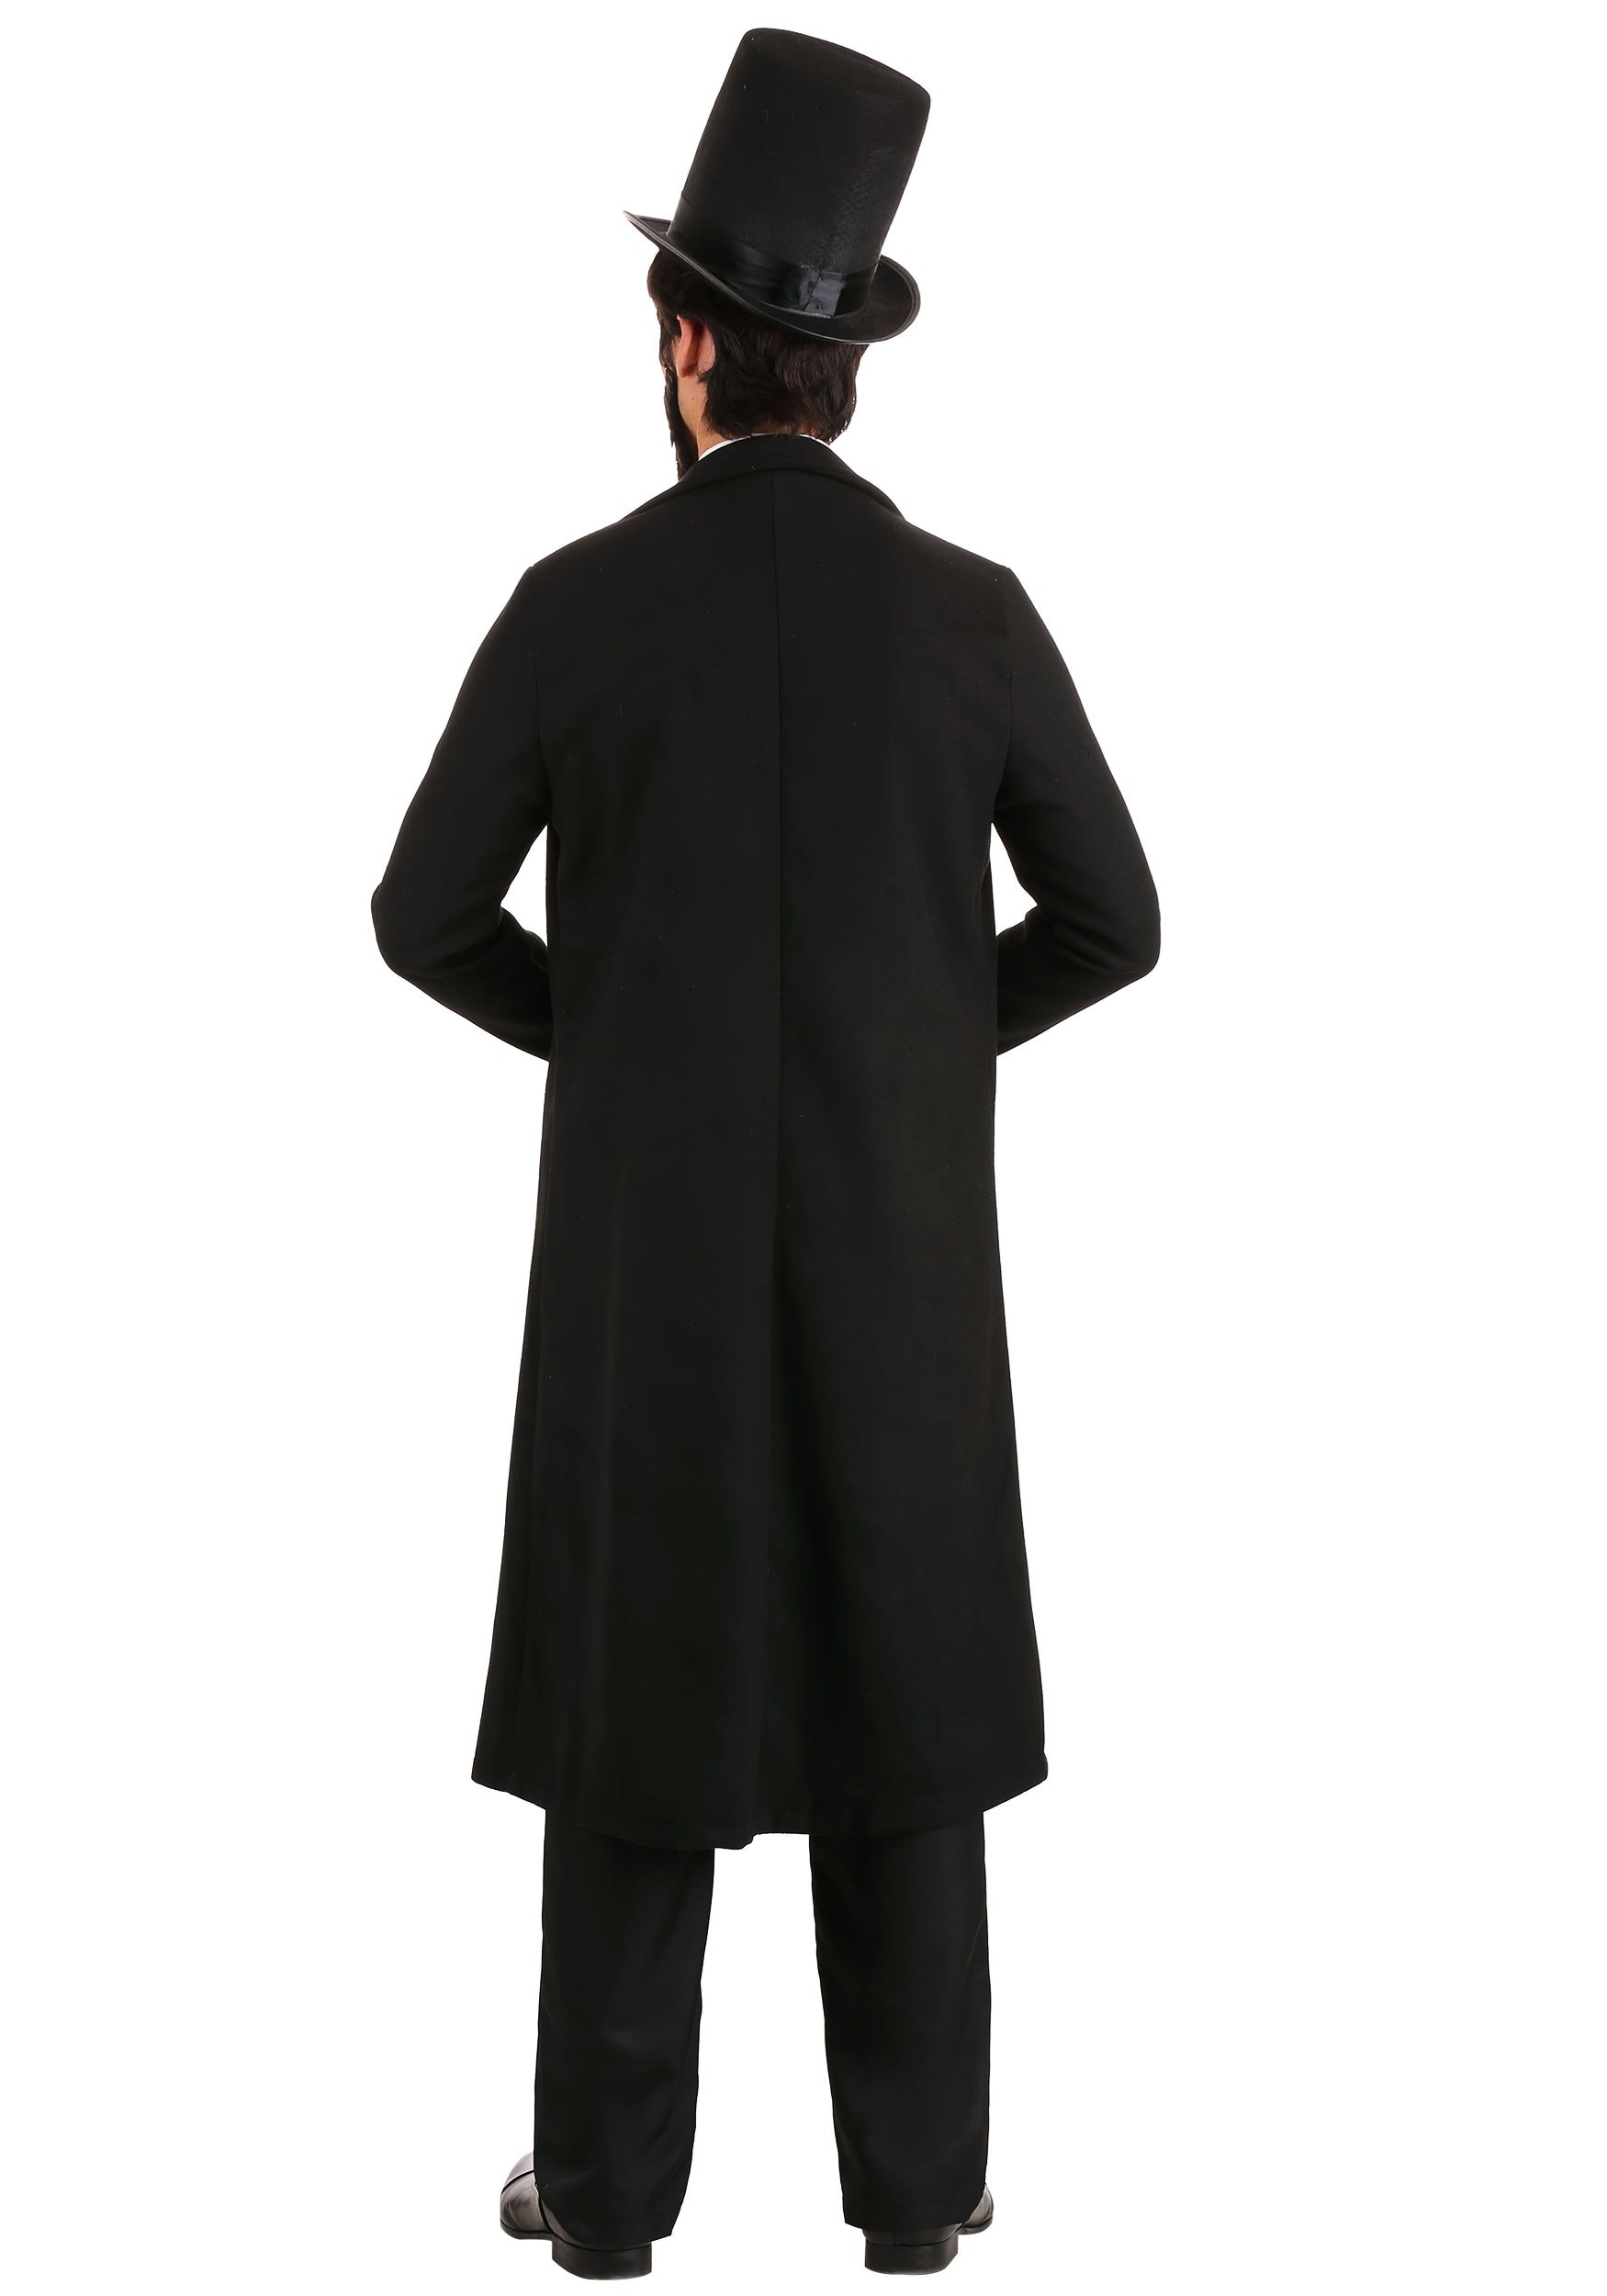 Adults President Abe Lincoln Fancy Dress Costume